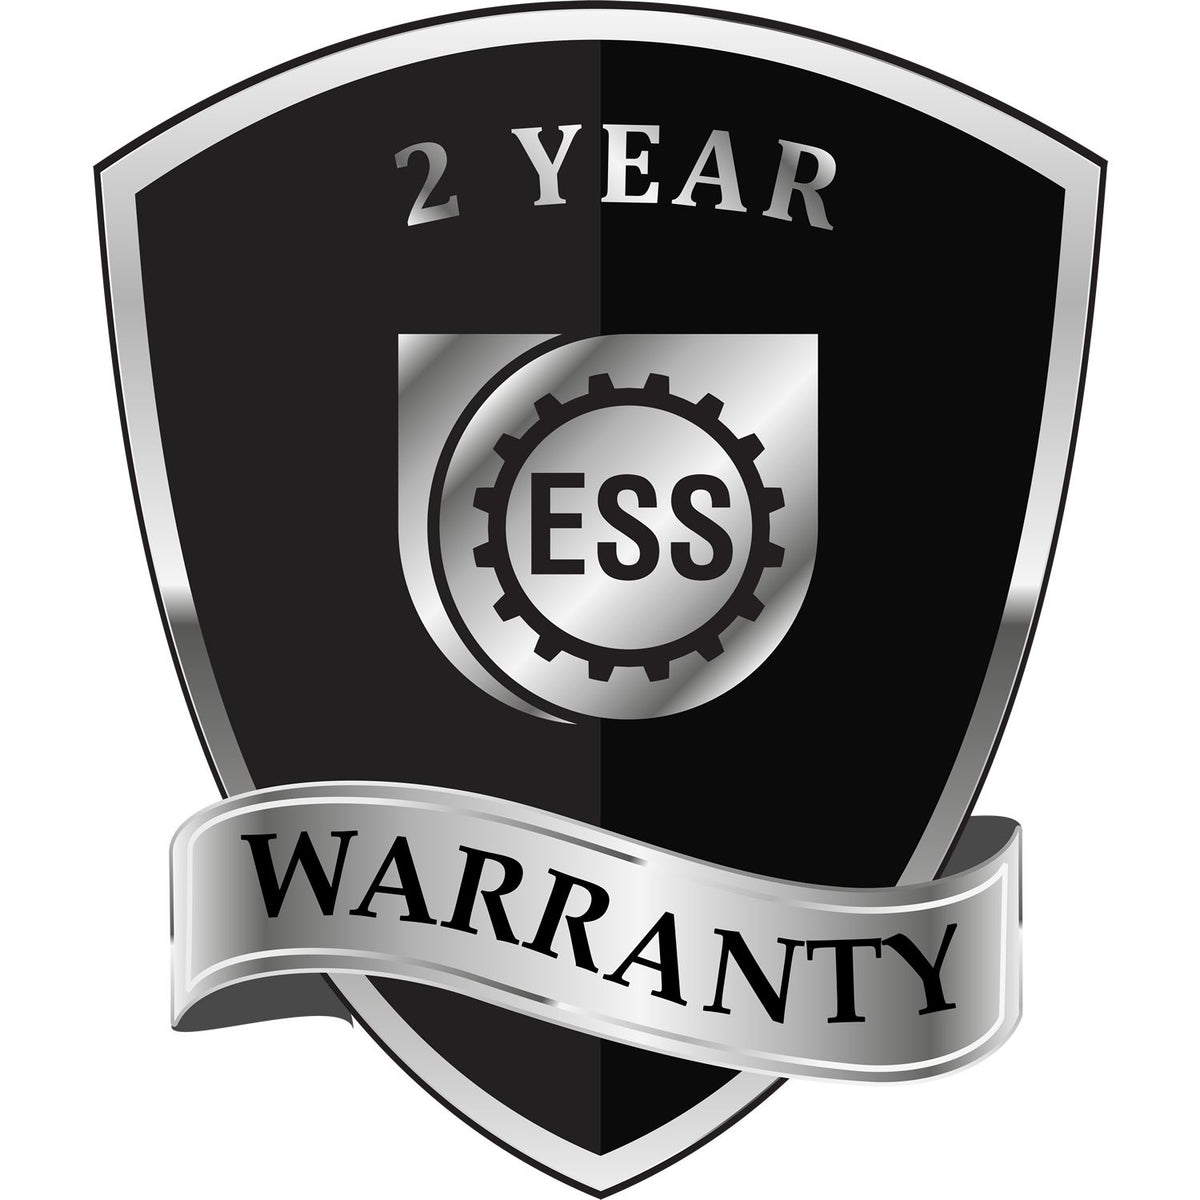 A badge or emblem showing a warranty icon for the State of Arkansas Extended Long Reach Engineer Seal